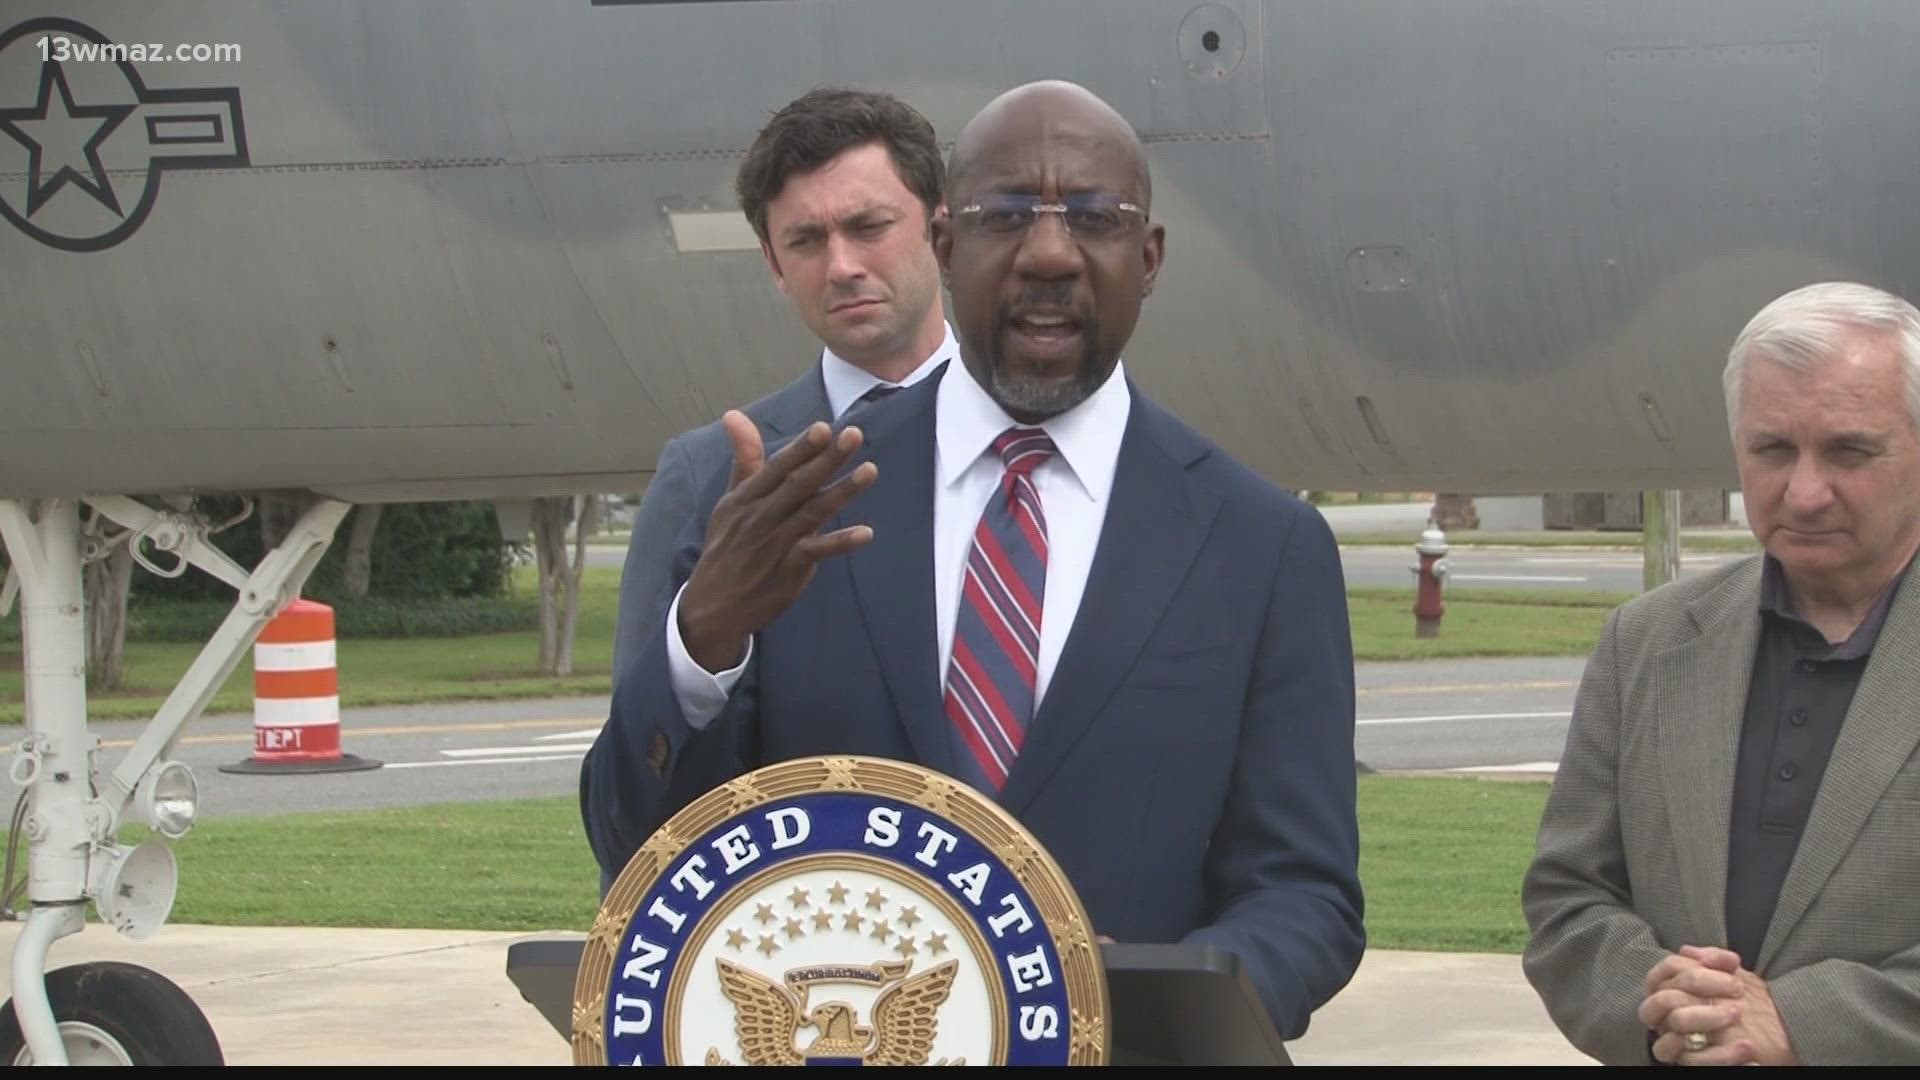 Robins Air Force Base could be on the forefront of the future of military tech, according to Georgia's two US senators Jon Ossoff and Raphael Warnock